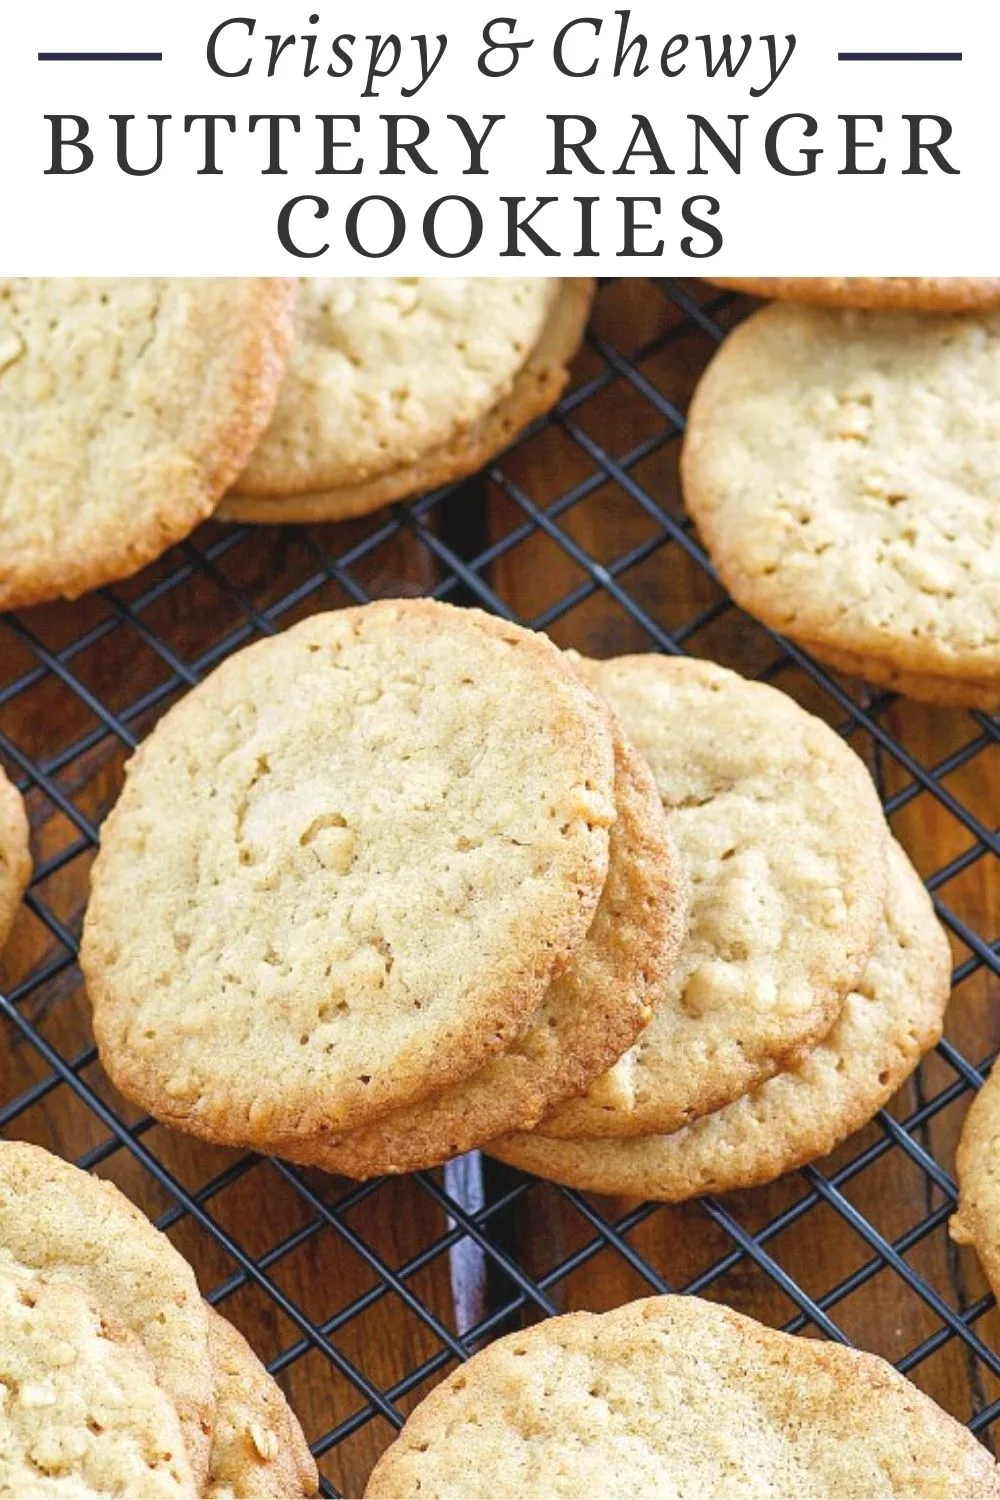 This vintage ranger cookies recipe came straight from an old country church cookbook, so you know they are good! The combination of crisp rice cereal, oatmeal, coconut and buttery cookie dough makes for the perfect mix of crispy and chewy. You are going to want to keep your cookie jar filled with your new favorite cookie.